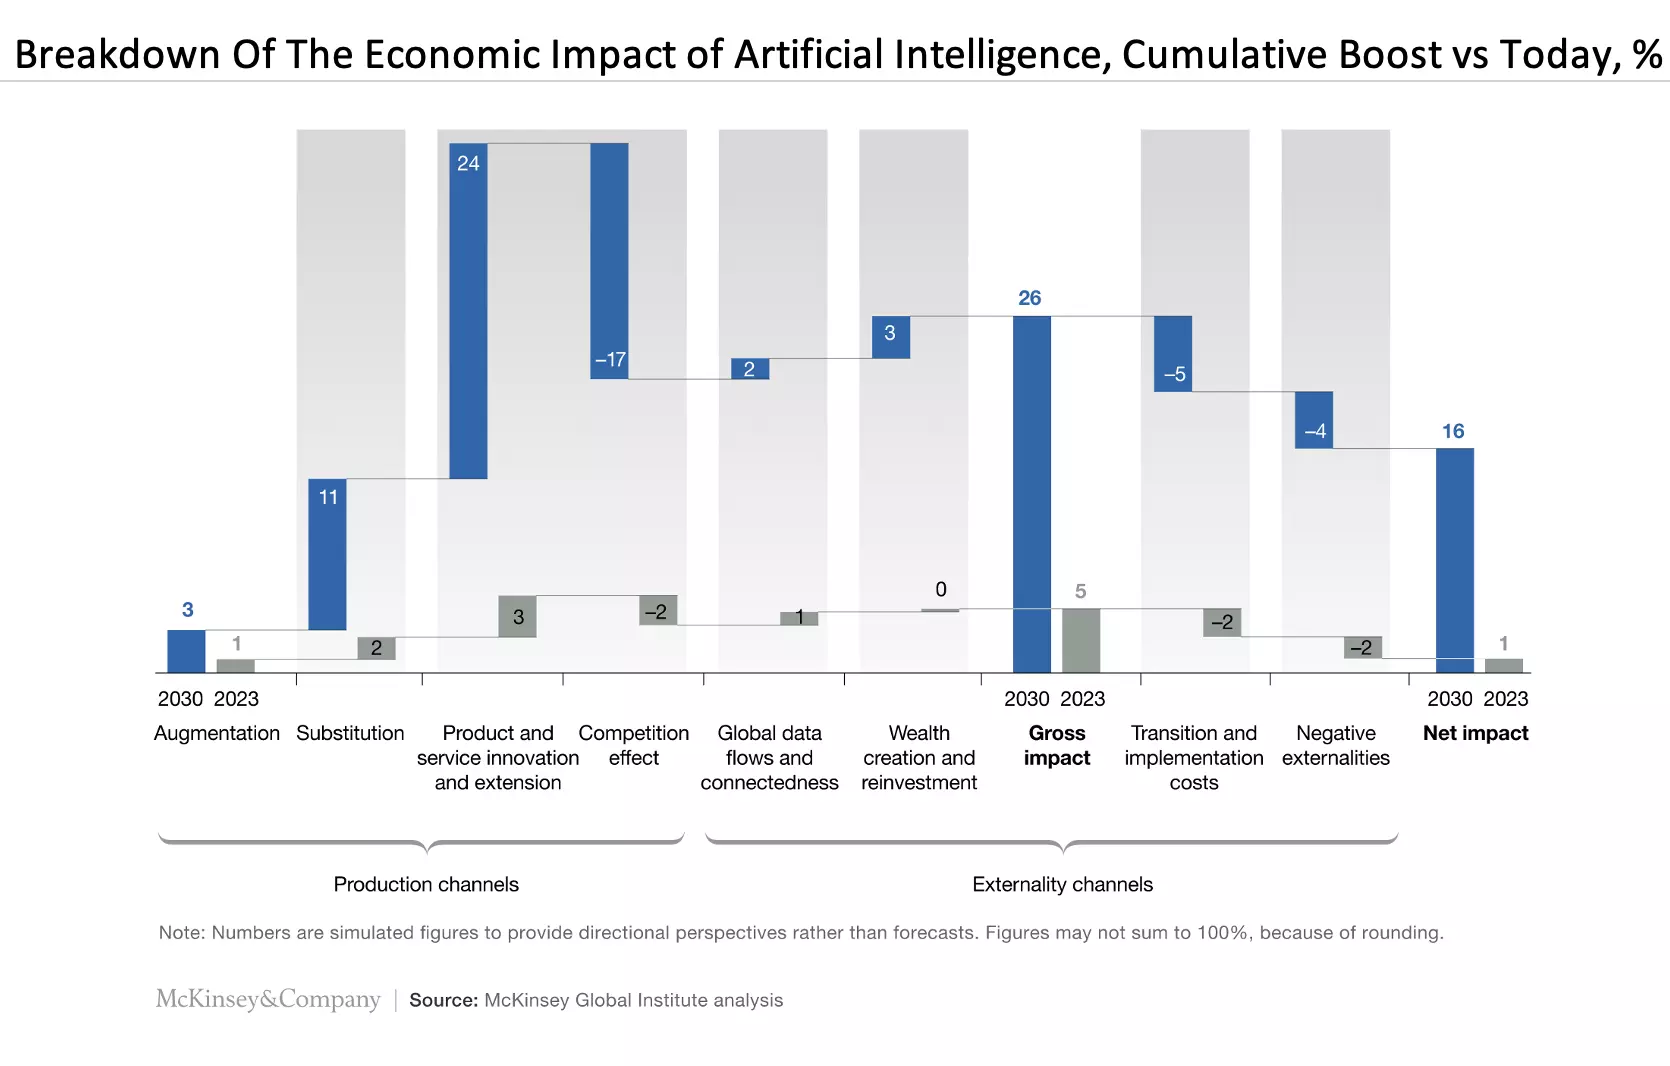 Breakdown_Of_The_Economic_Impact_of_Artificial_Intelligence_Cumulative_Boost_vs_Today.png